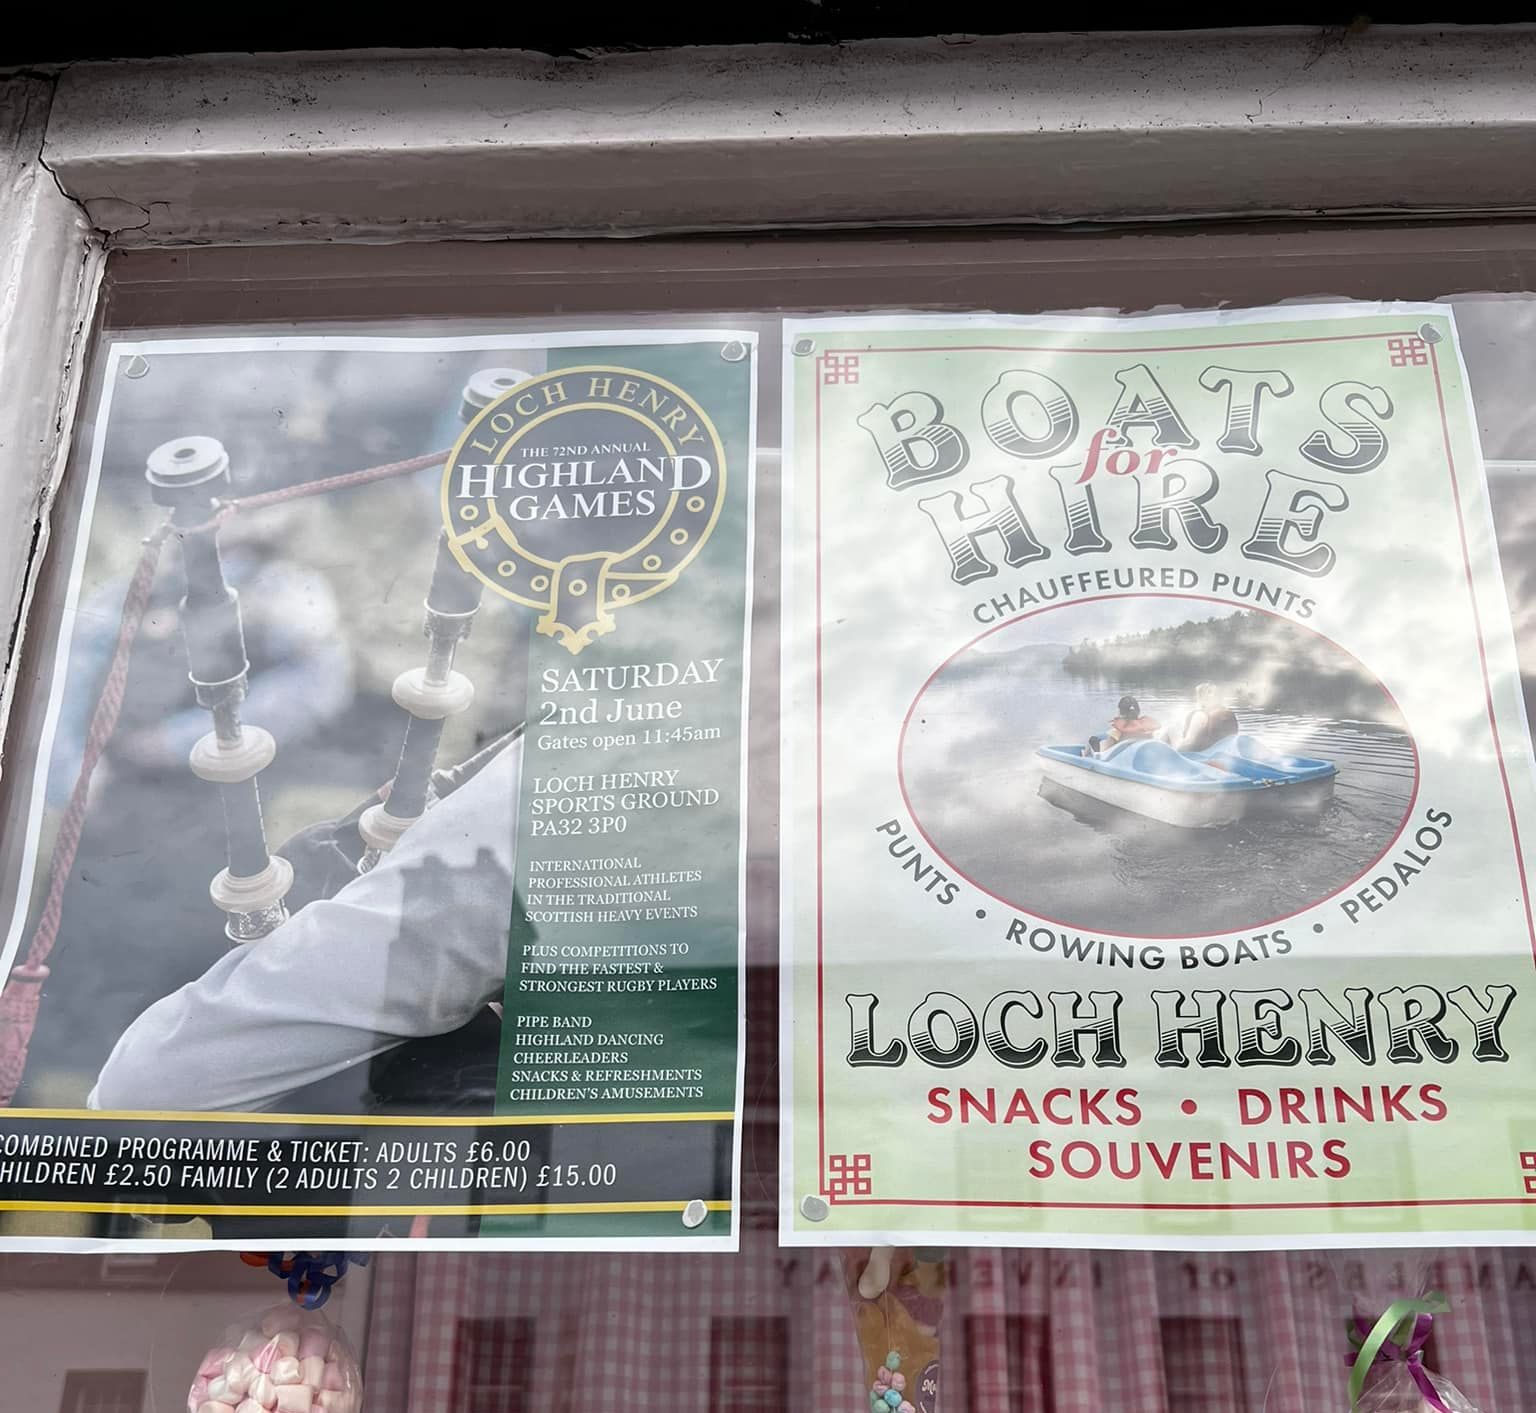 Pamphlets for boat tours on ‘Loch Henry’ began appearing in shop windows around the time.